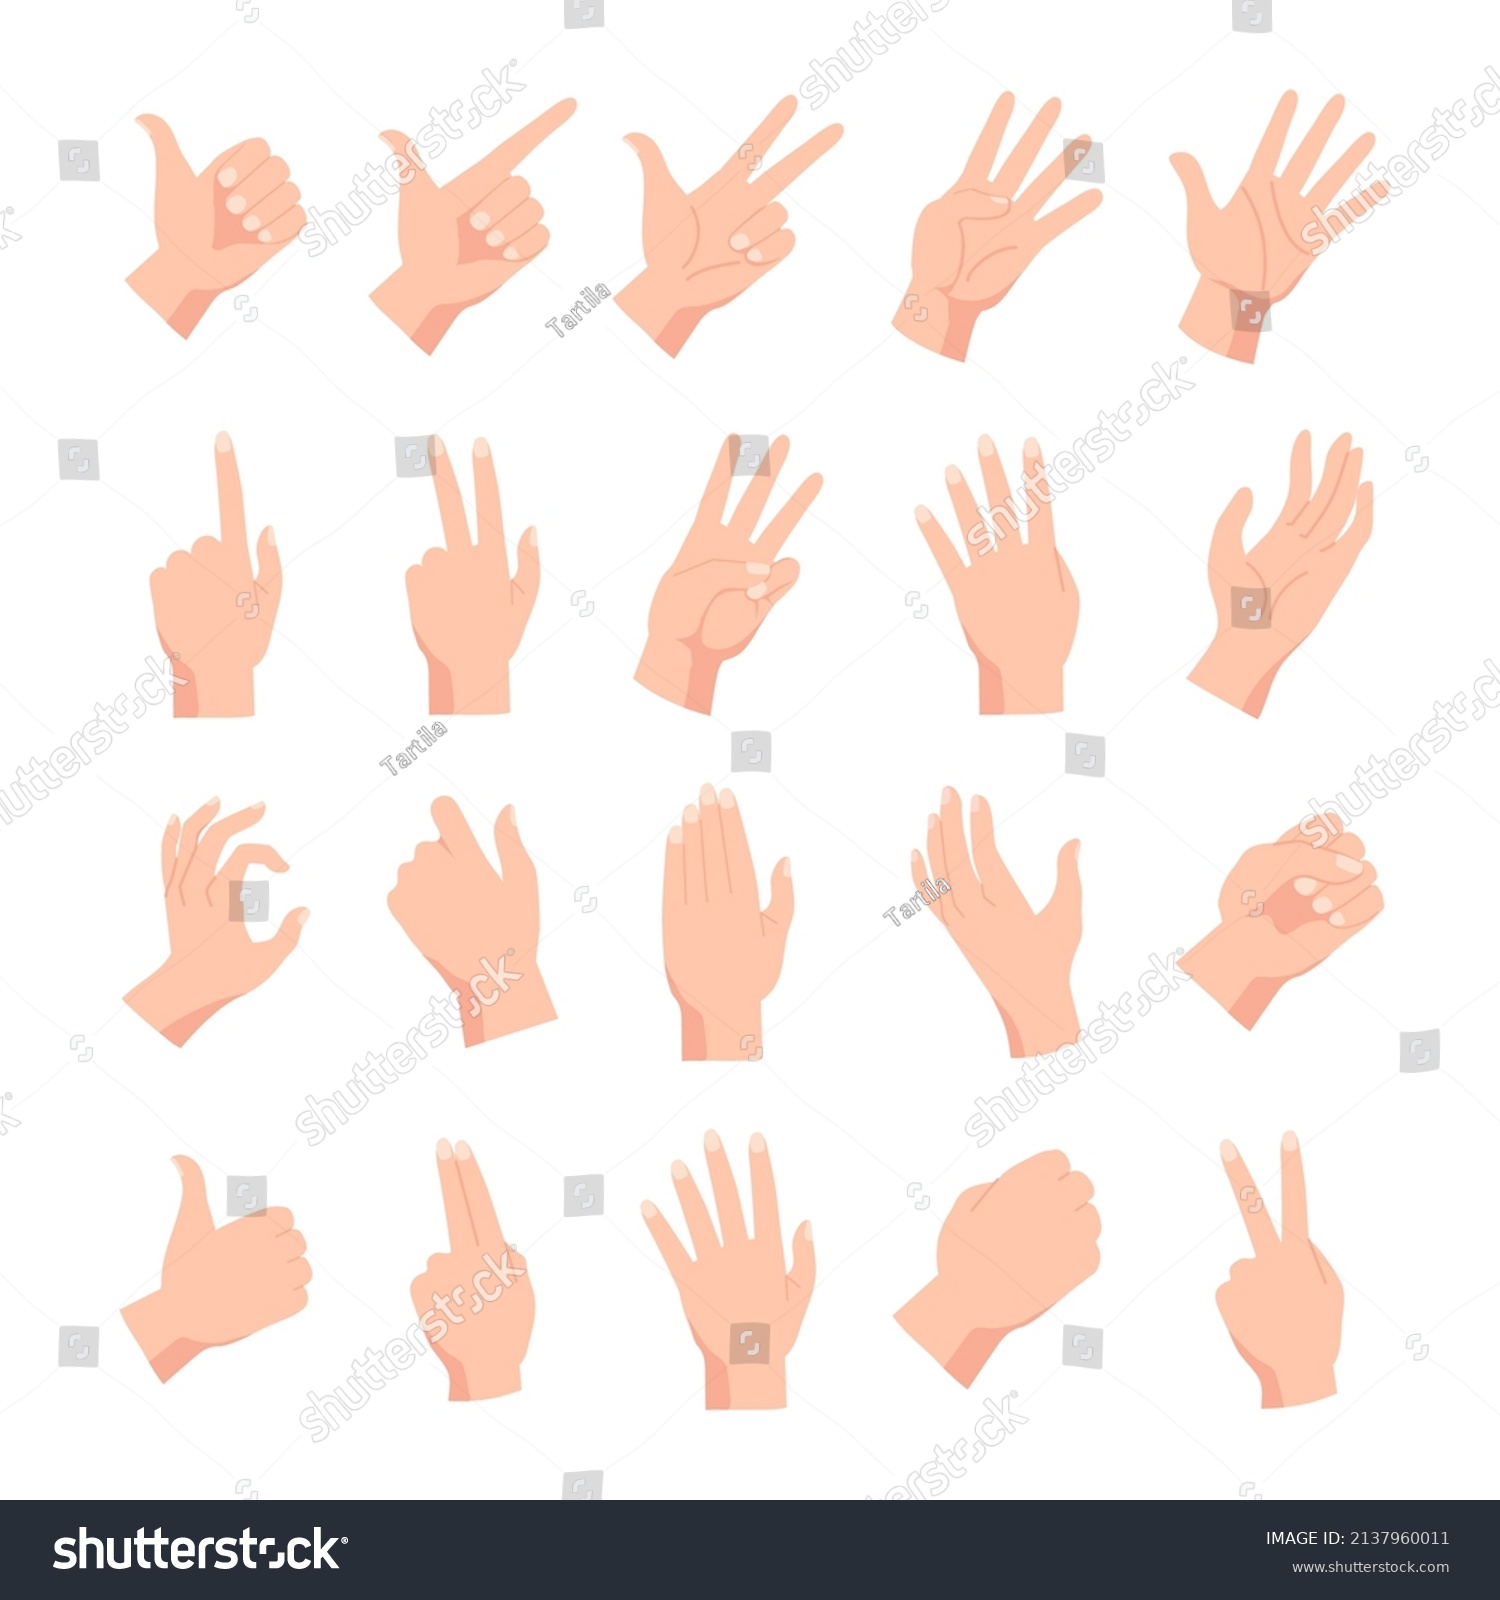 Cartoon Human Female Male Hands Poses Stock Vector (Royalty Free ...